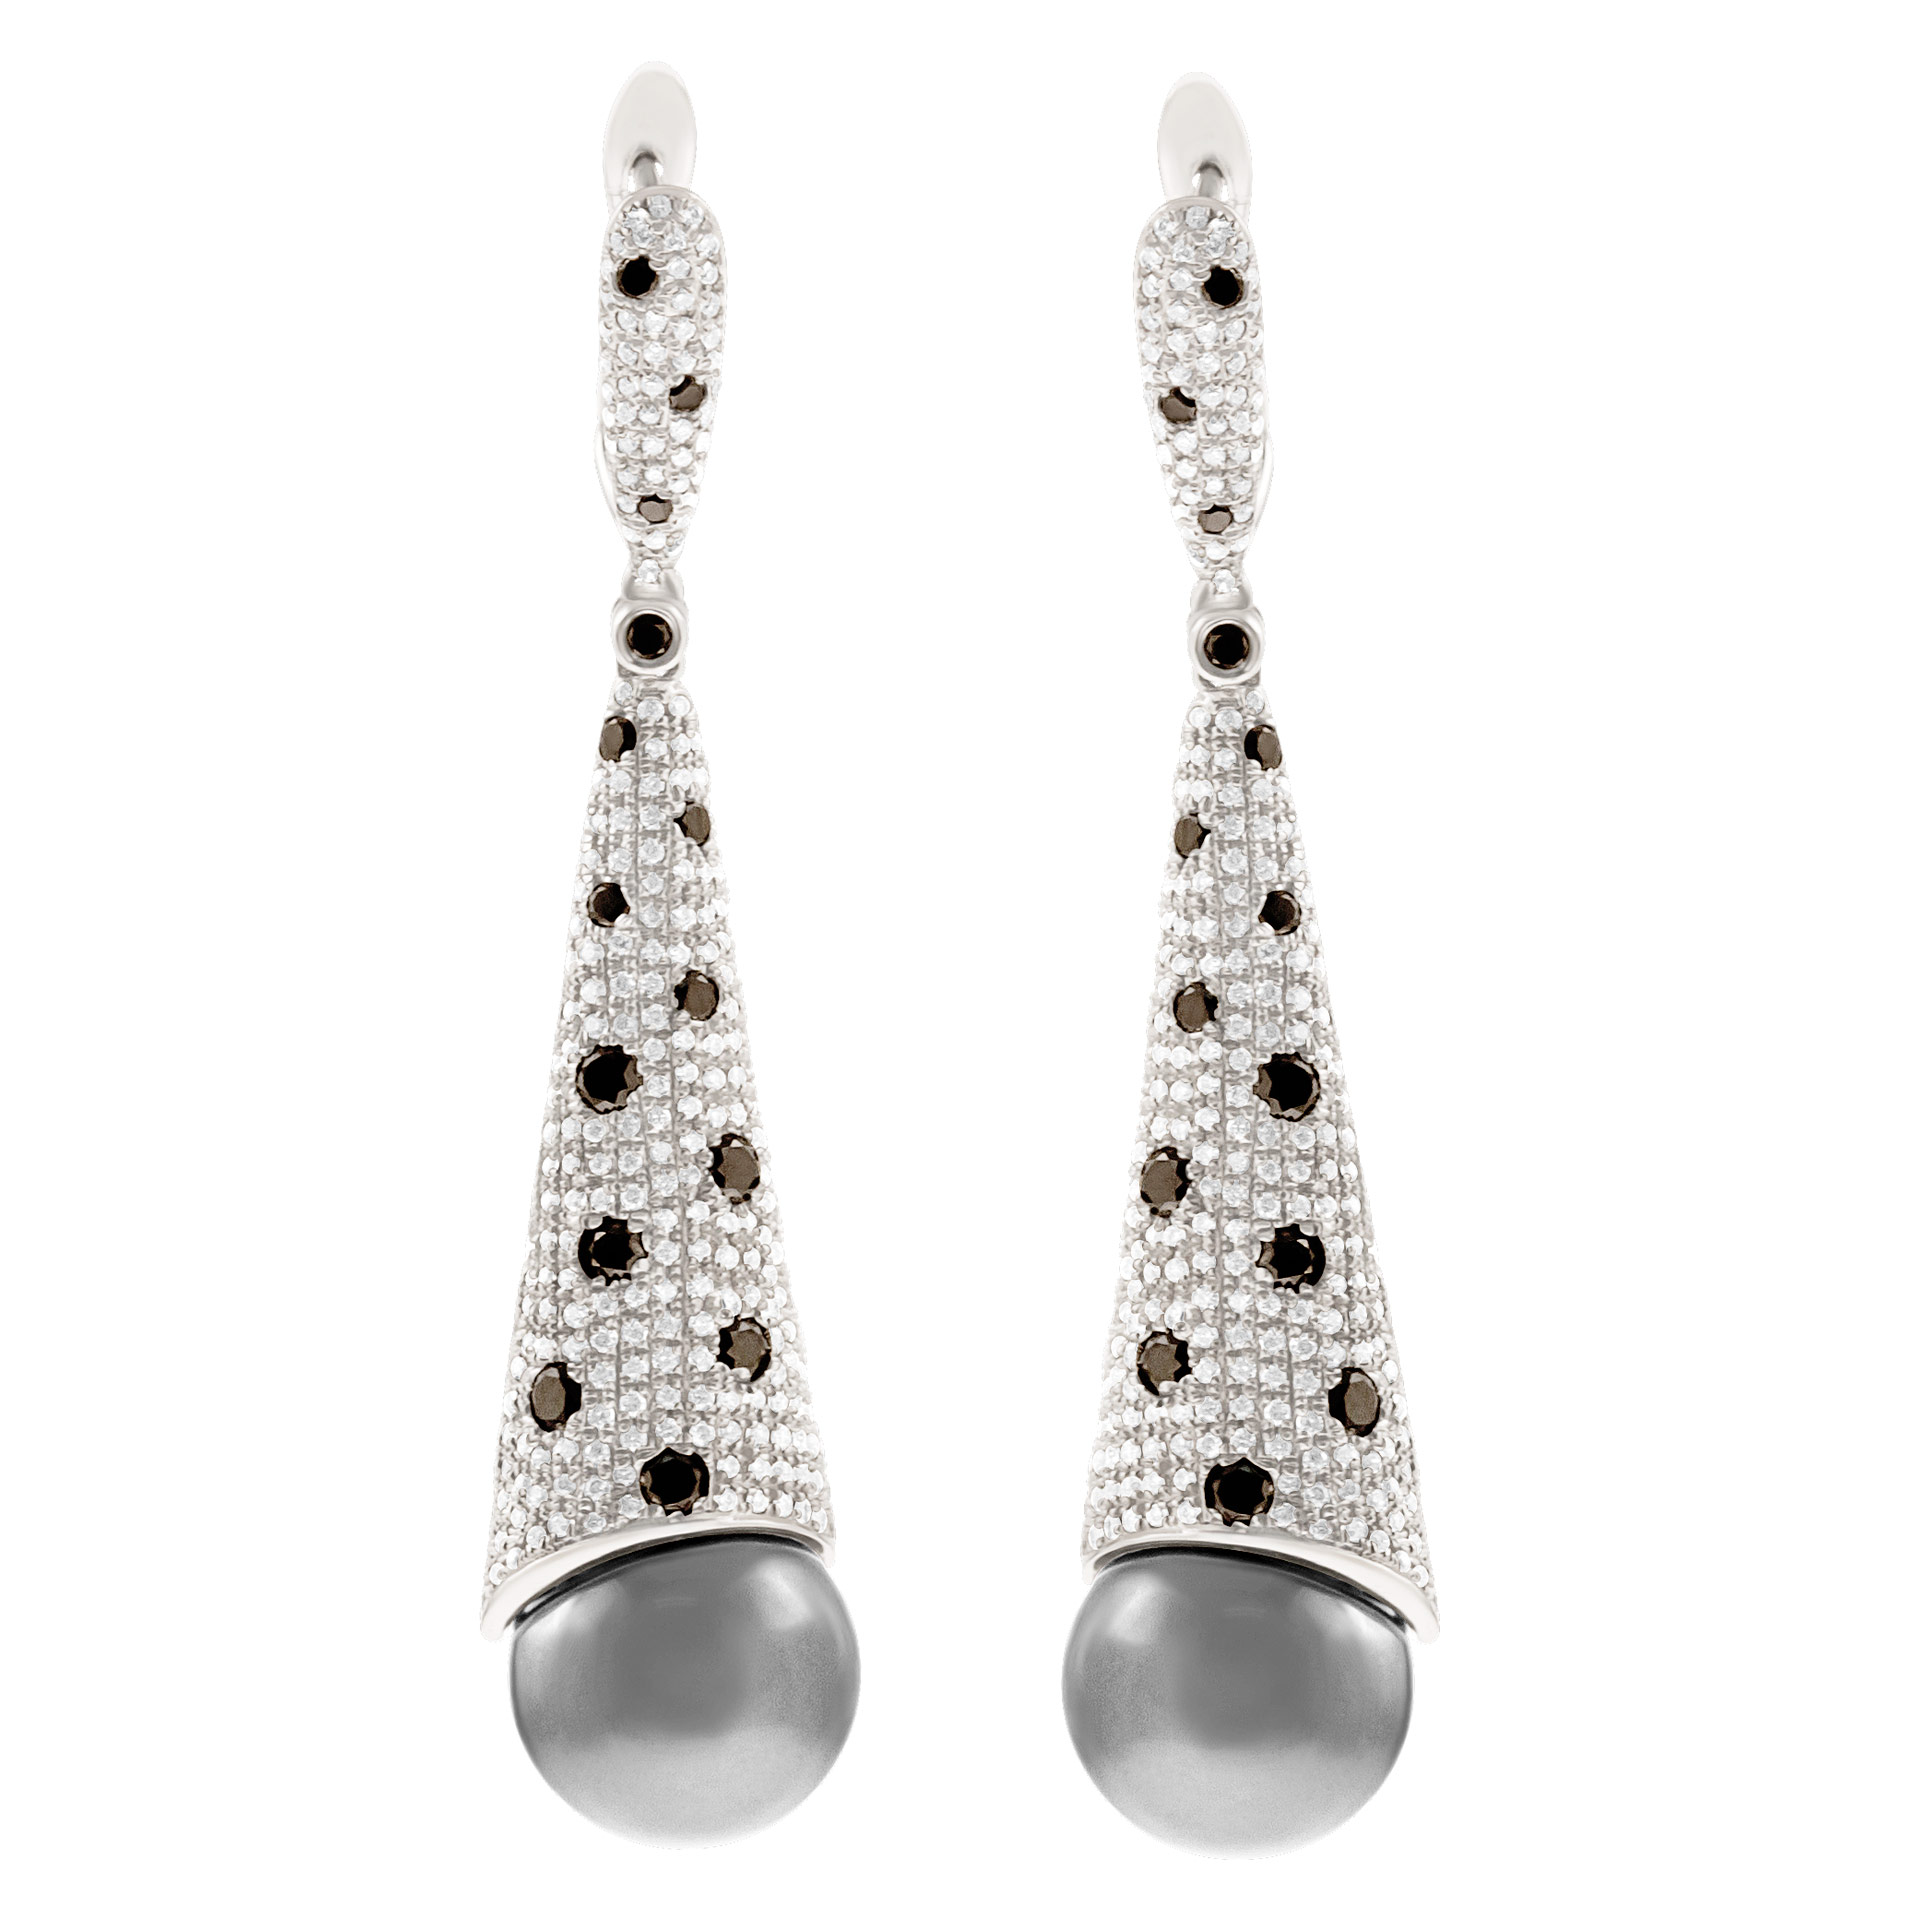 Pearl and diamonds earrings in 18k white gold with app. 1.67 carats in diamonds image 1